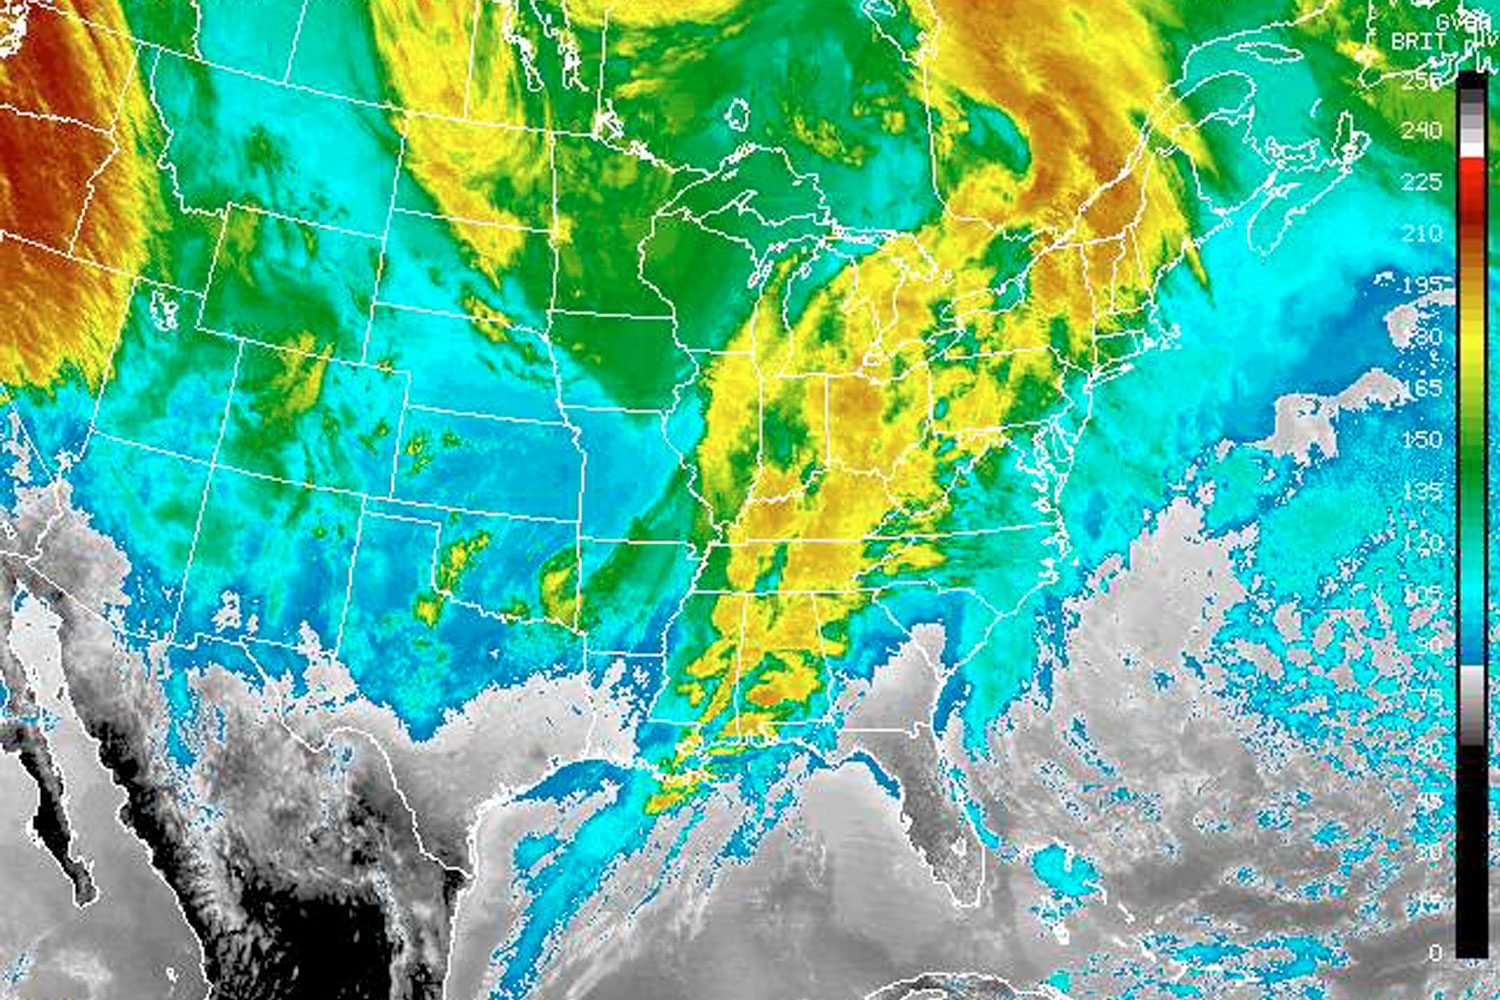 This color enhanced image from the GEOS-8 satellite shows a band of severe weather streaking up from the Gulf of Mexico across the southeastern United States on December 19, 2002.